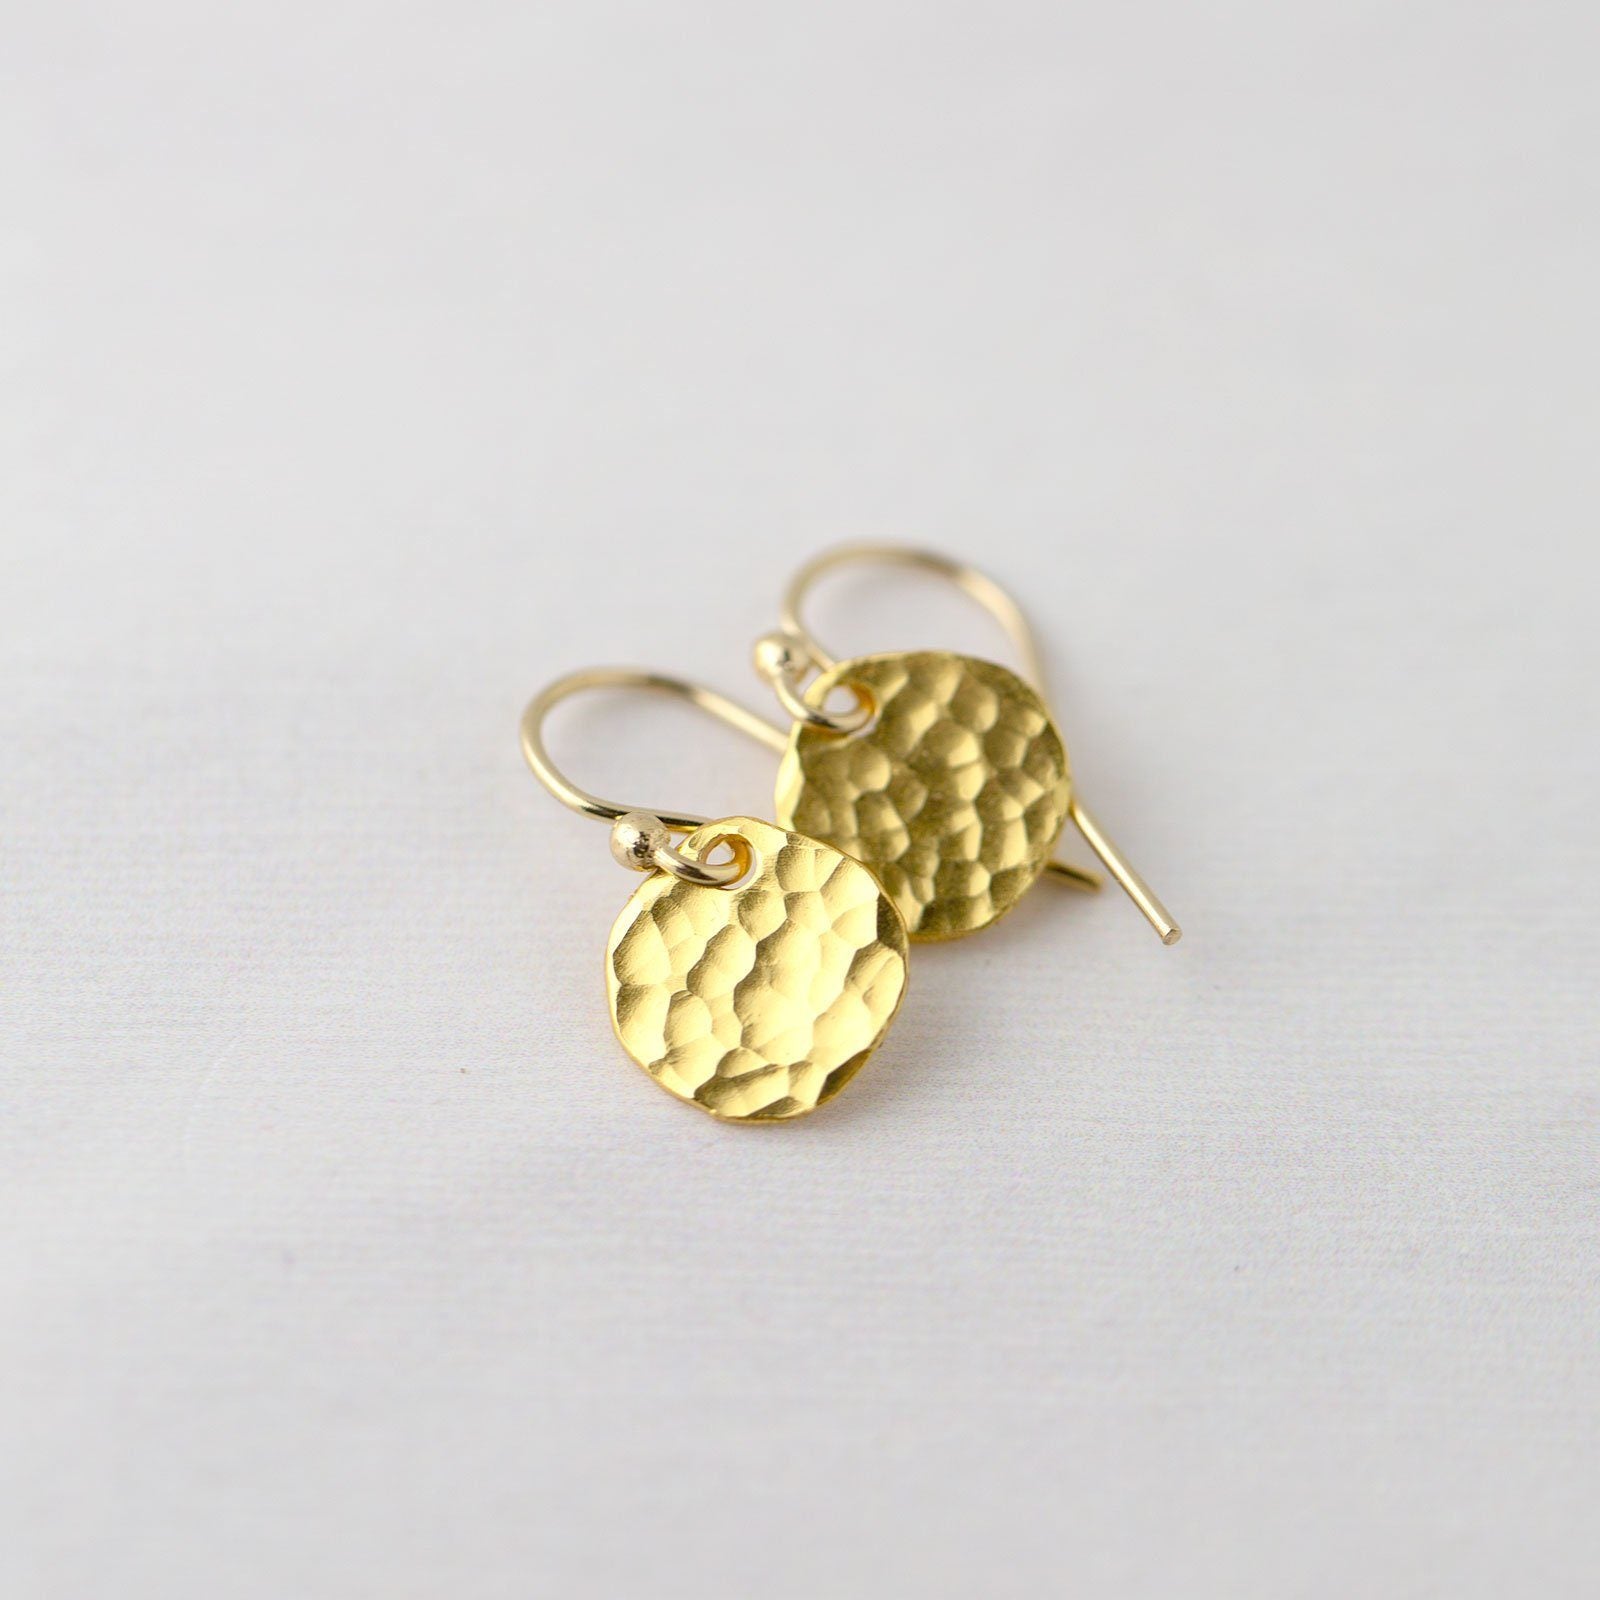 Small Hammered Gold Disk Earrings - Handmade Jewelry by Burnish